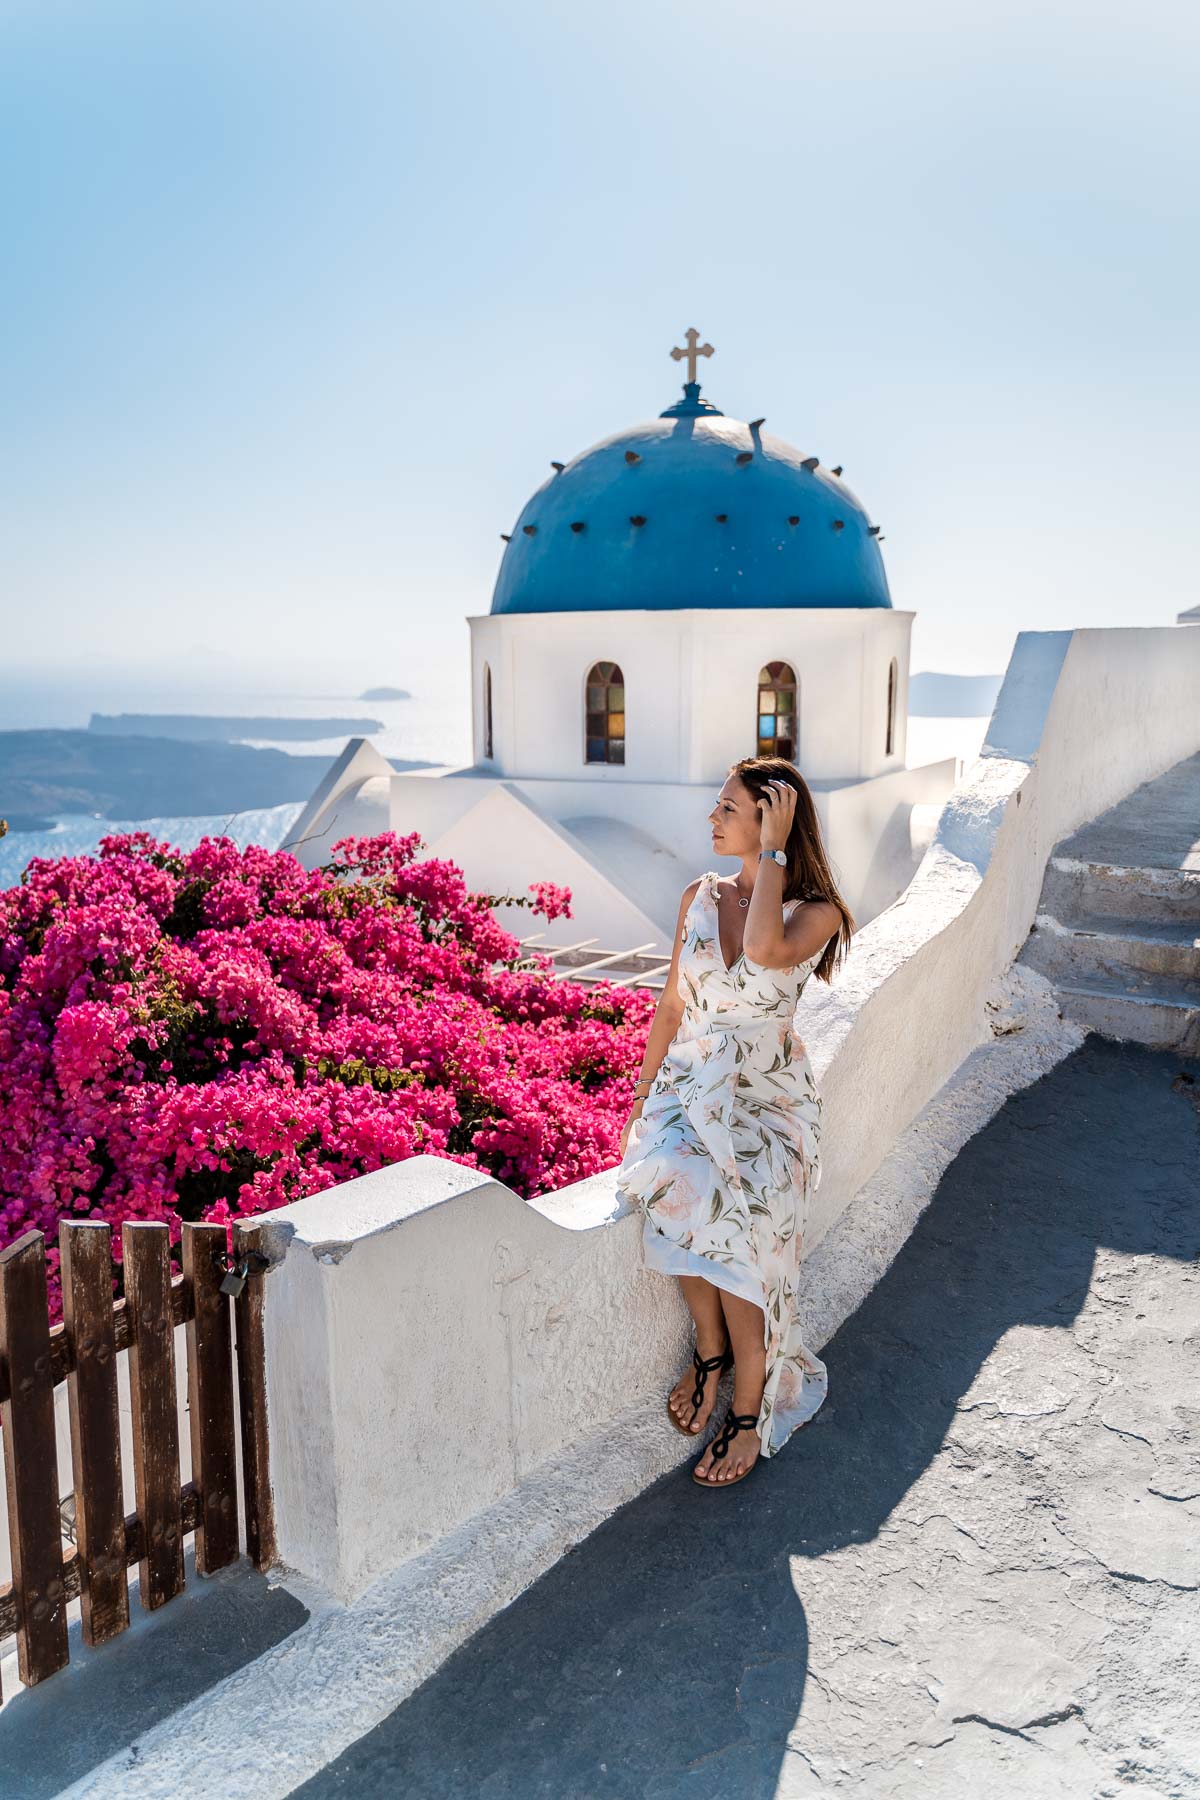 Girl in a floral dress sitting in front of a blue domed church in Imerovigli, Santorini